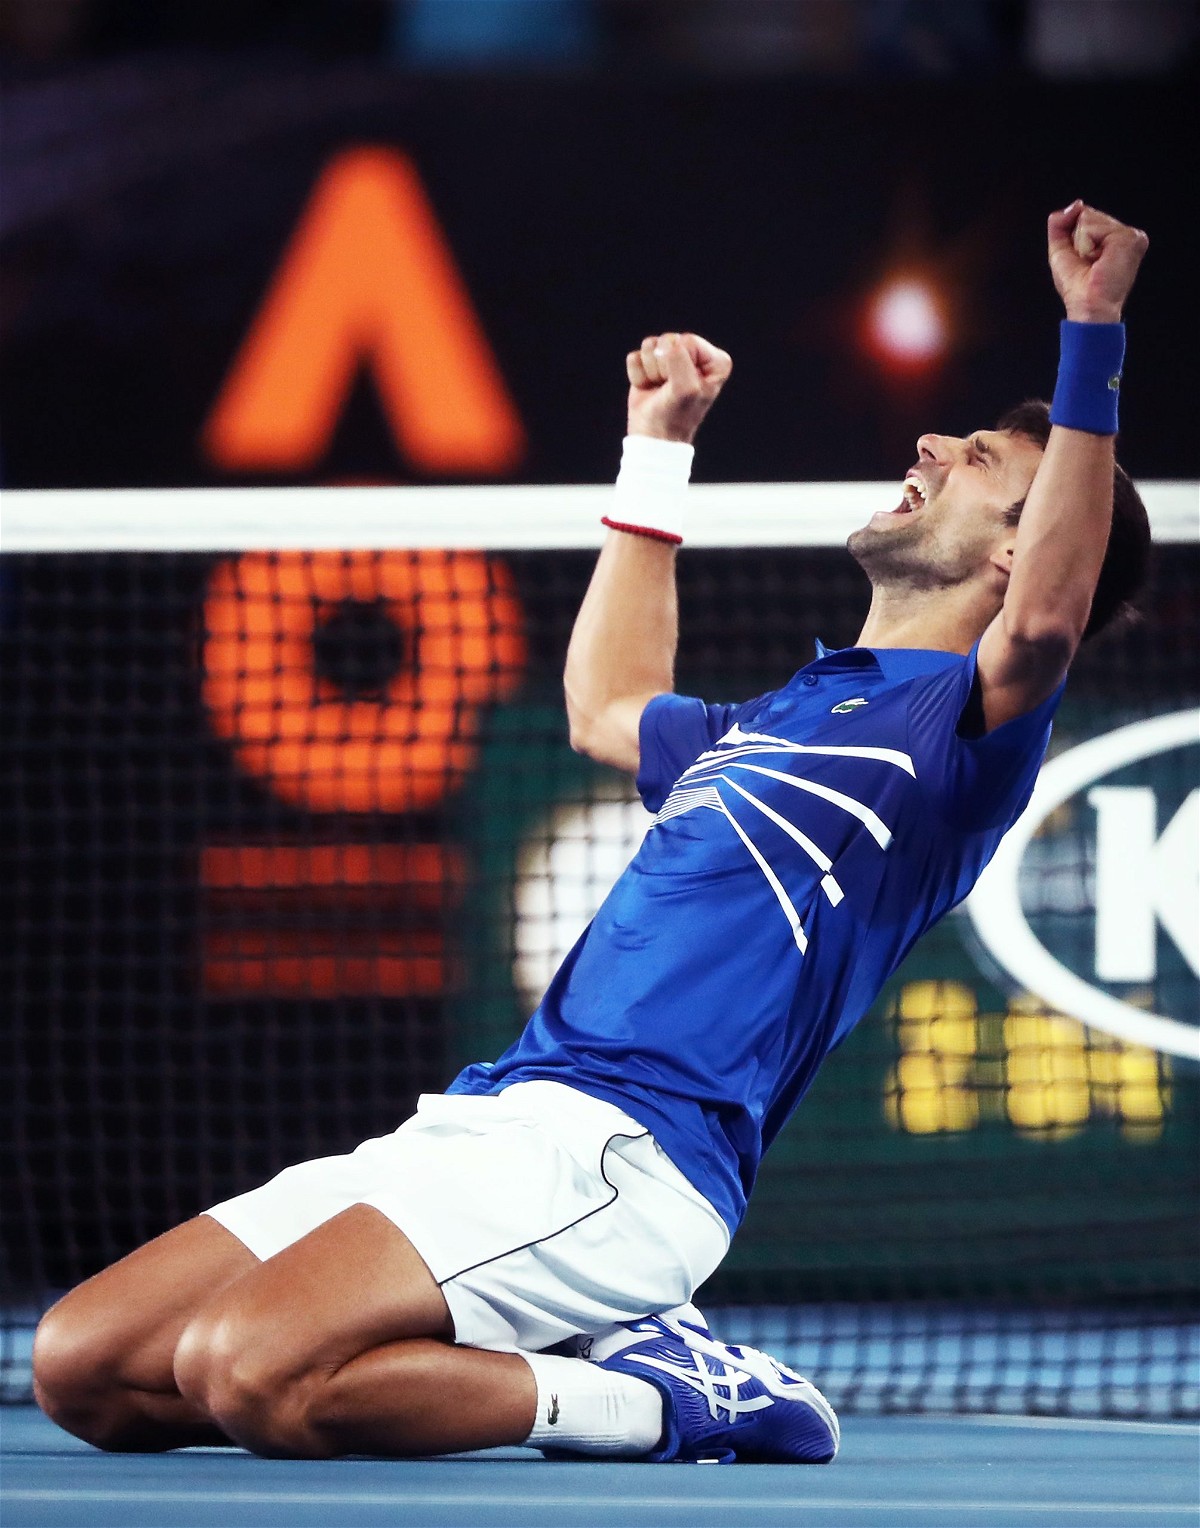 MELBOURNE, AUSTRALIA - JANUARY 27: Novak Djokovic of Serbia celebrates after winning championship point in his Men's Singles Final match against Rafael Nadal of Spain during day 14 of the 2019 Australian Open at Melbourne Park on January 27, 2019 in Melbourne, Australia. (Photo by Matt King/Getty Images)